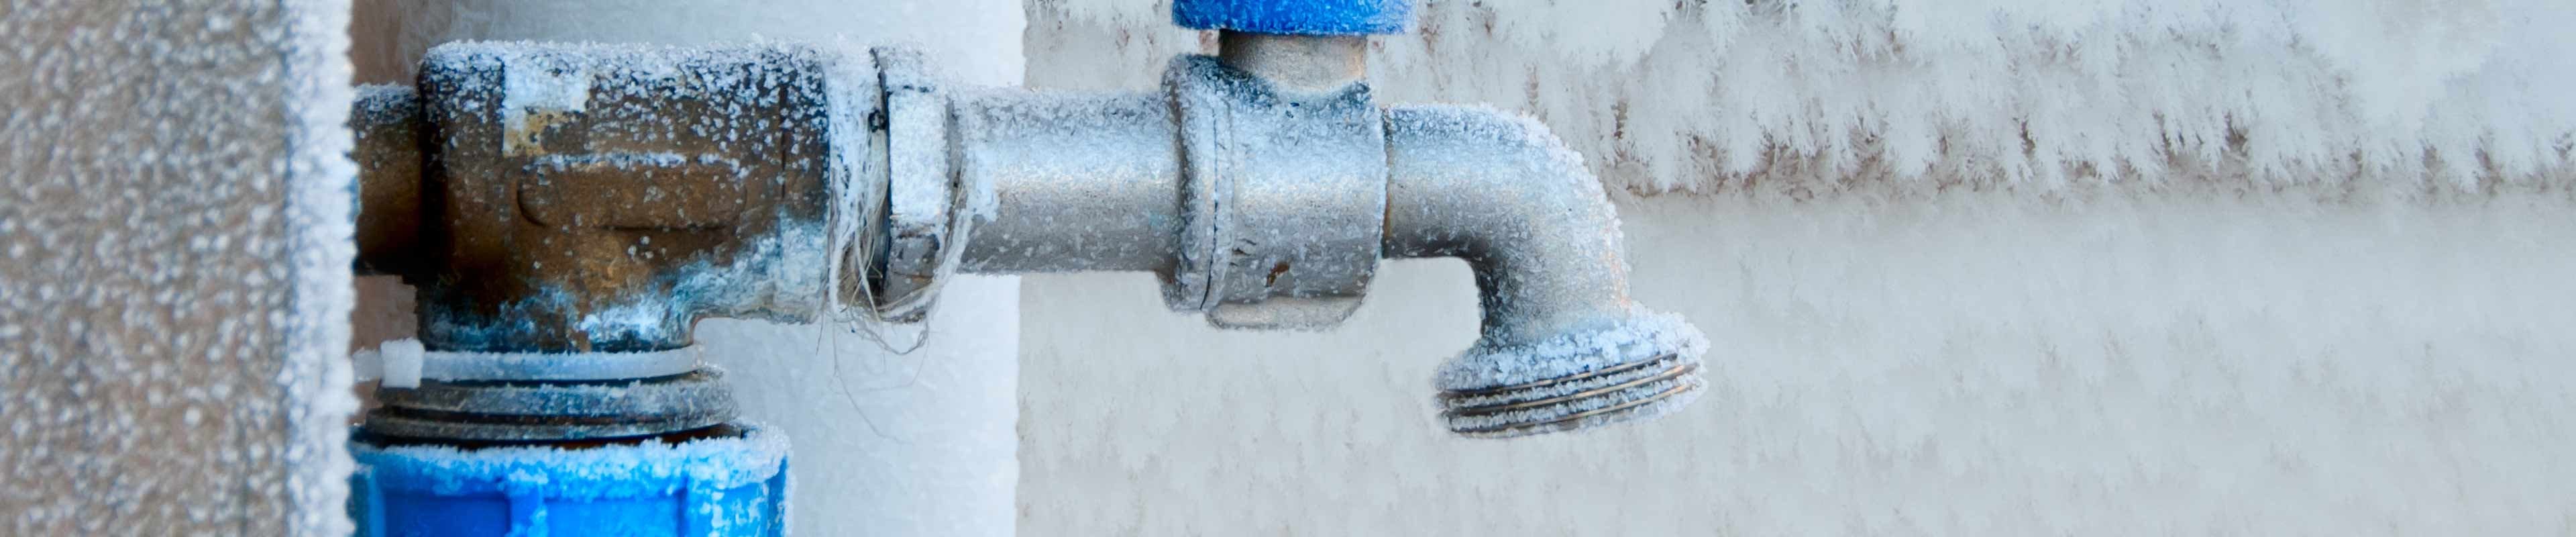 A frozen faucet outside of a home, connected to a pipe that may burst.